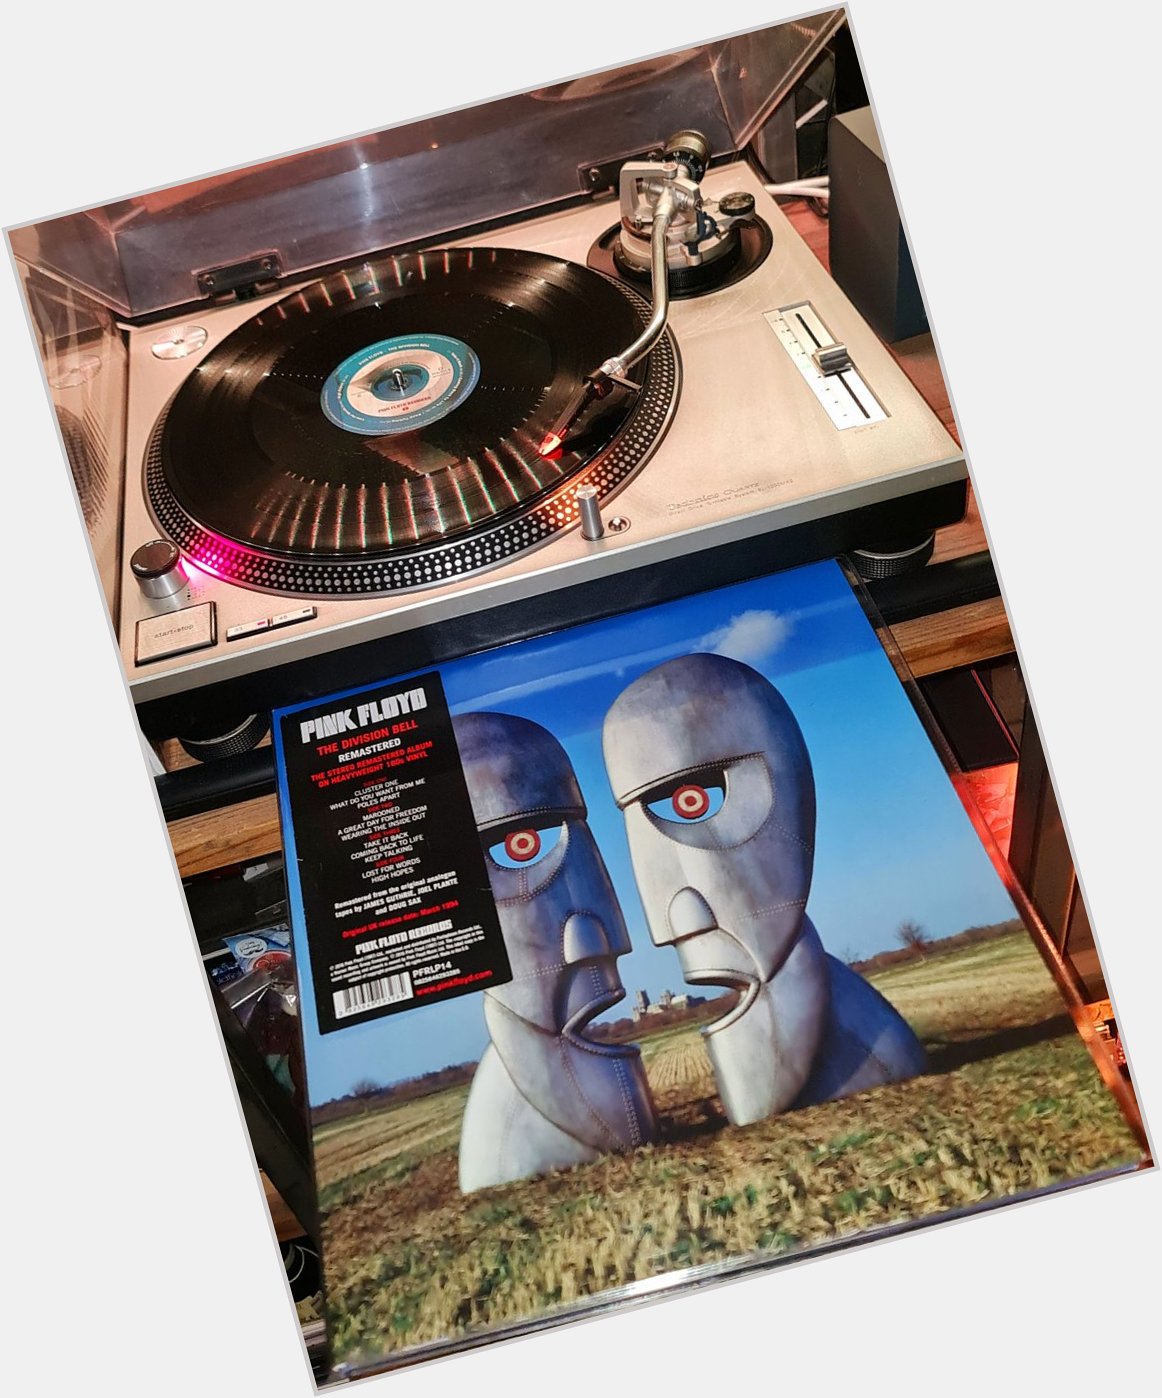          Happy Birthday to David Gilmour

...now spinning at Ed\s...

Pink Floyd - The Division Bell : High Hopes 